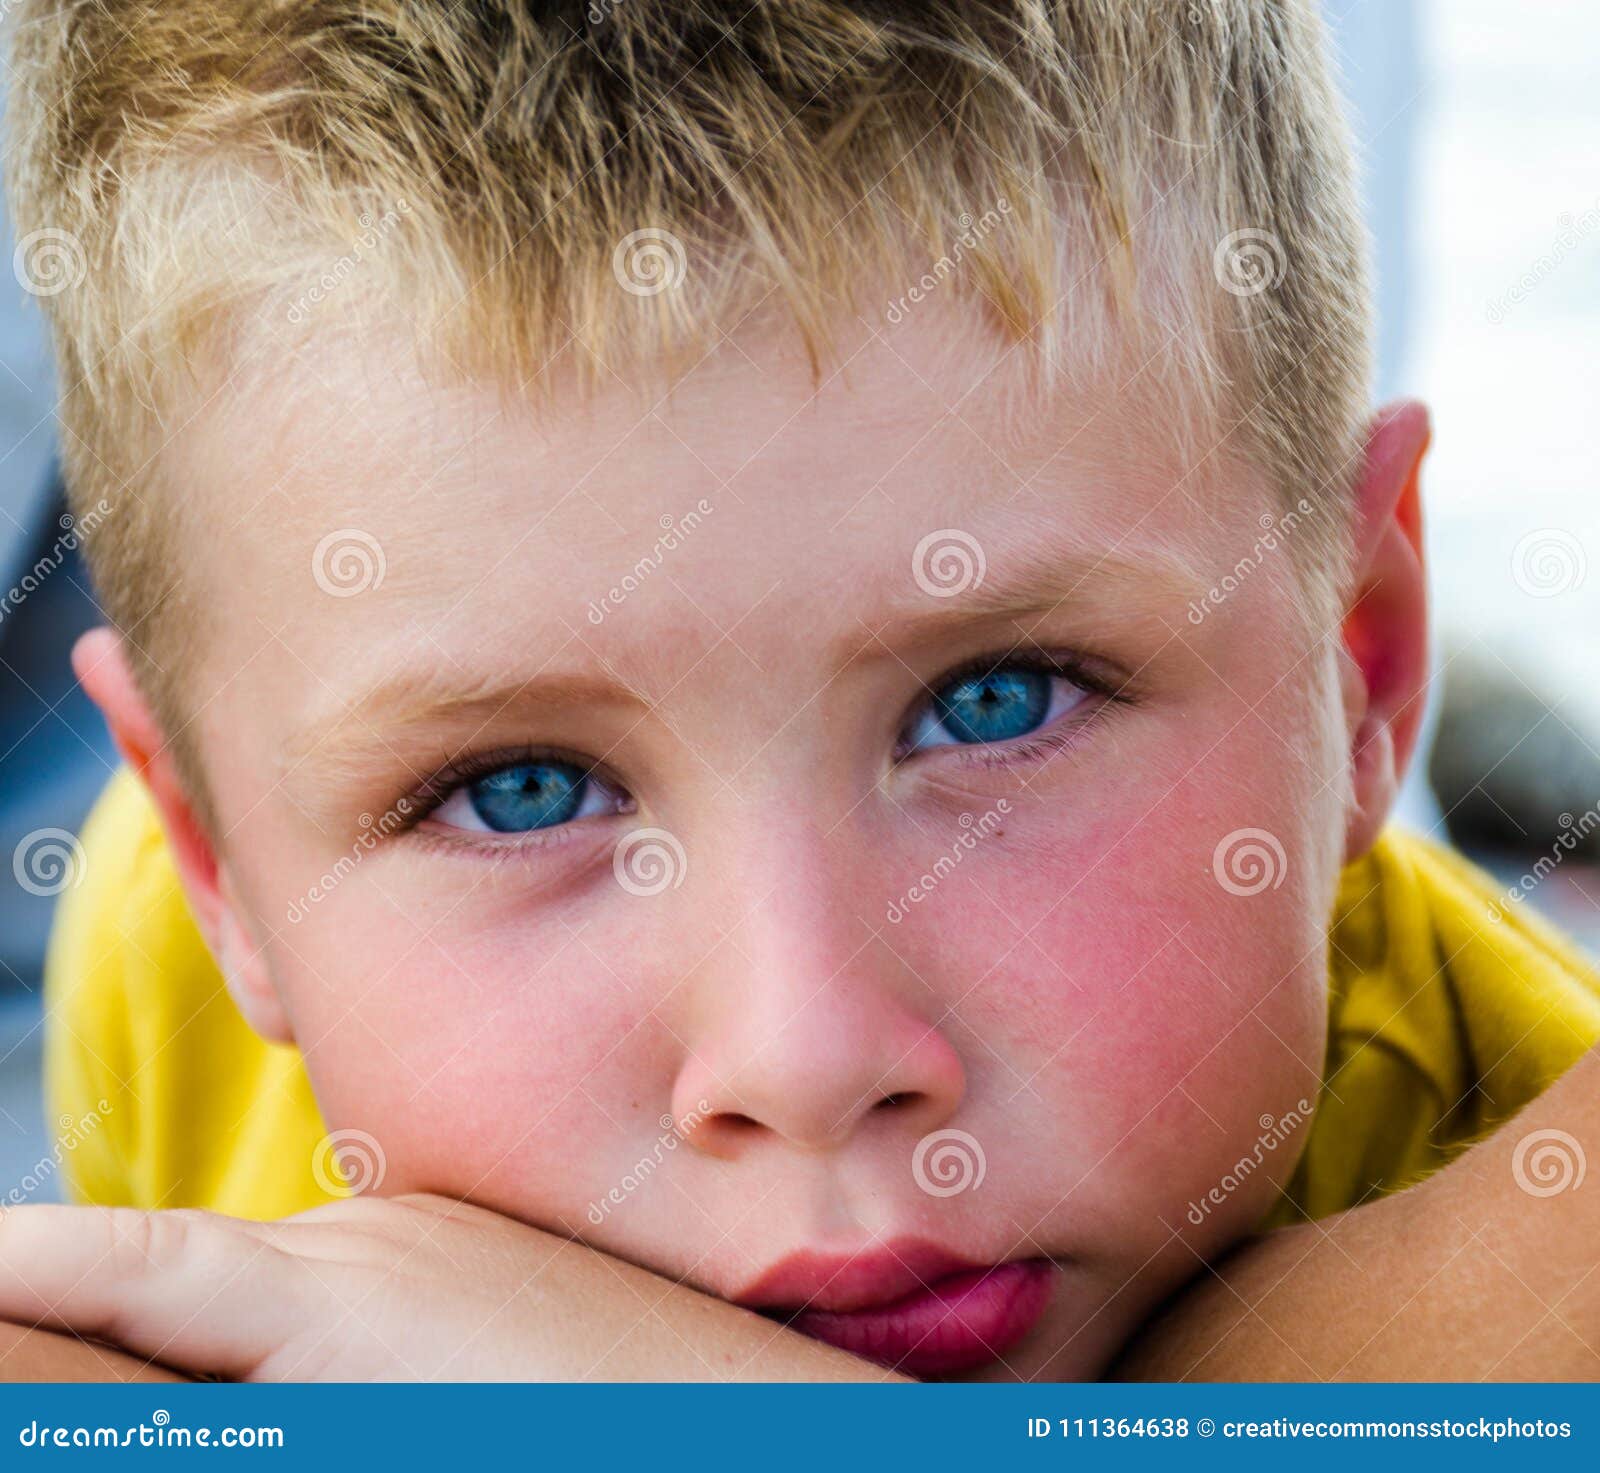 Close Up Photography Of Boy With Blue Eyes Picture Image 111364638